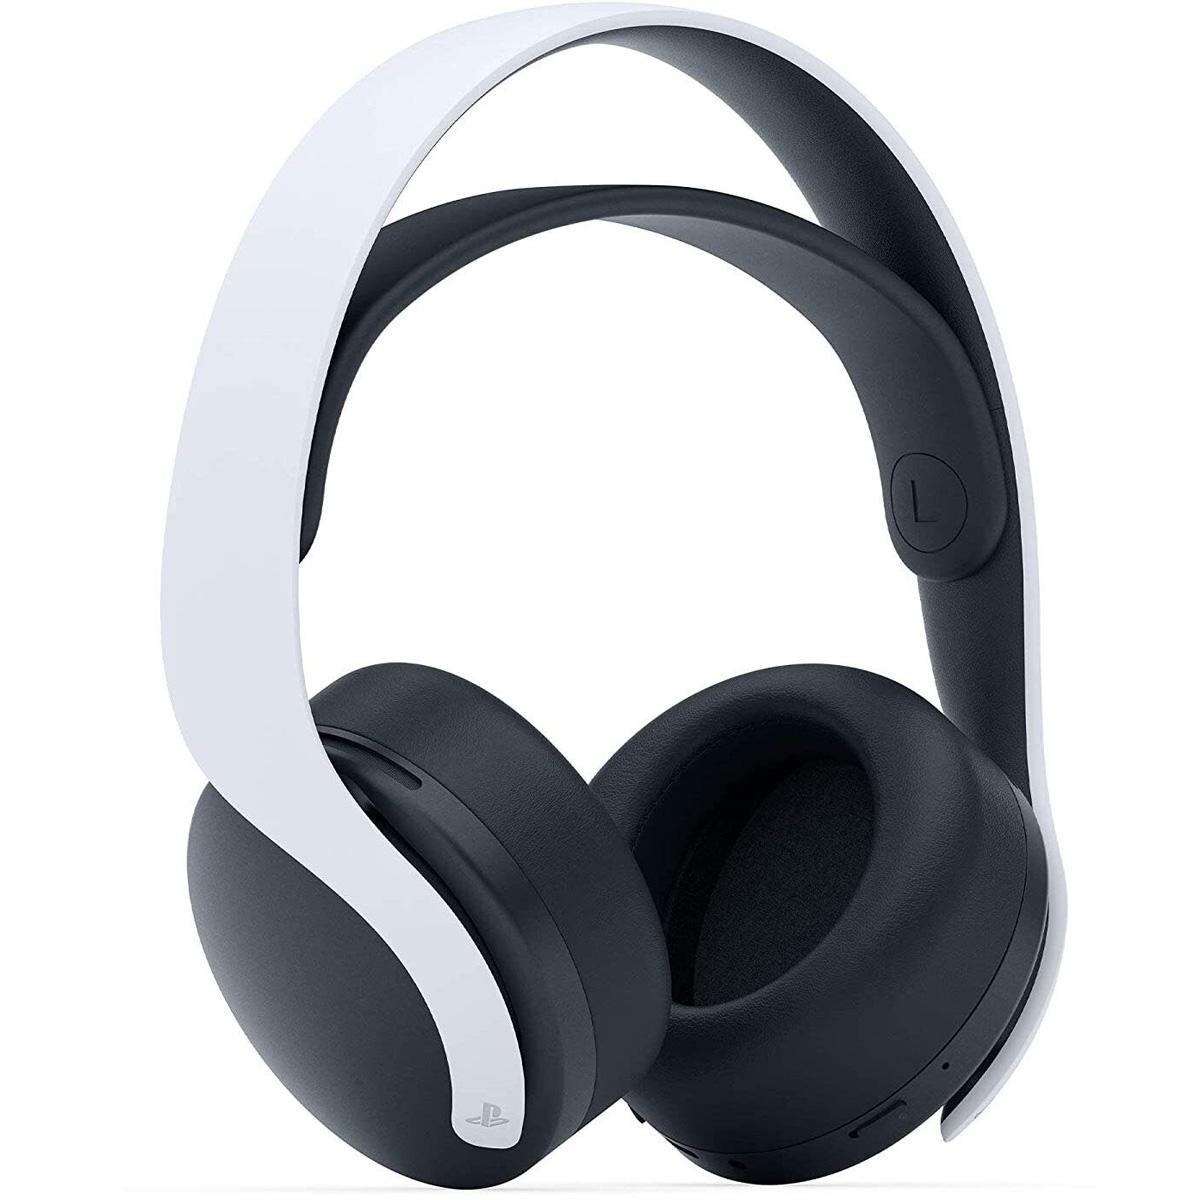 PlayStation PULSE 3D Wireless Headset for $69 Shipped